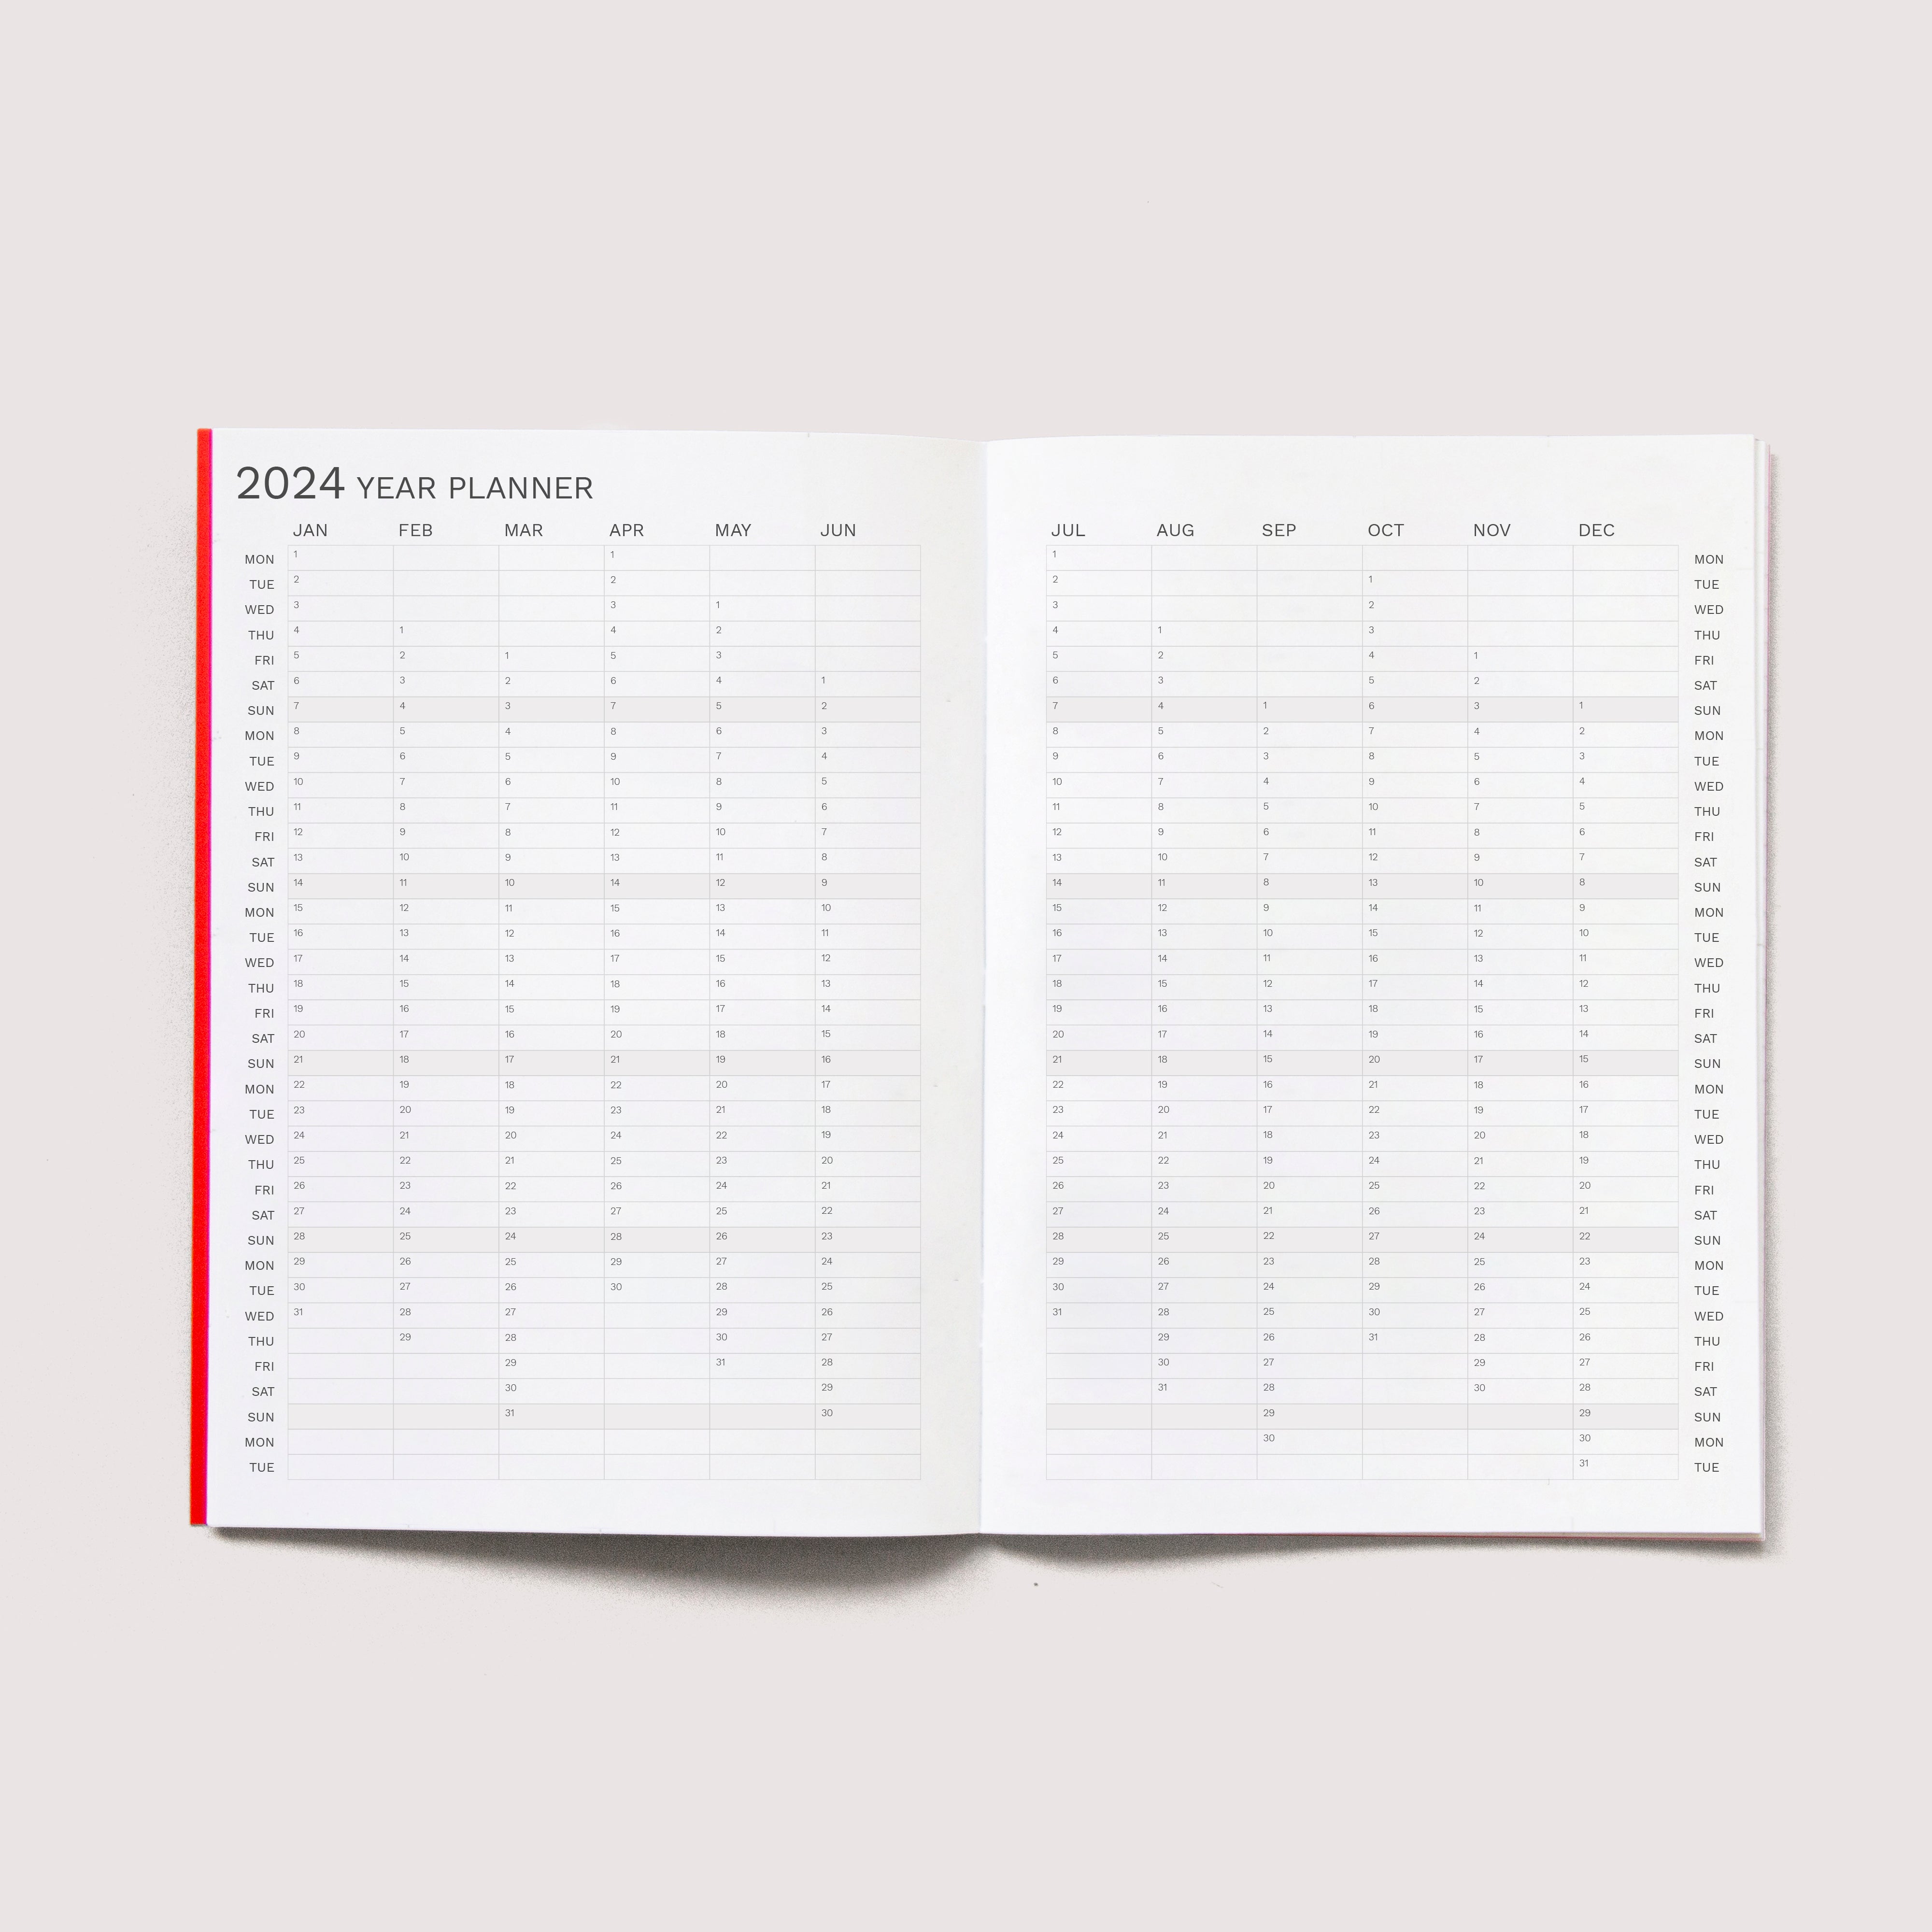 OCTÀGON DESIGN | "2024 Monthly Planner A4 size" Monthly planner. 2024 Year planner template.